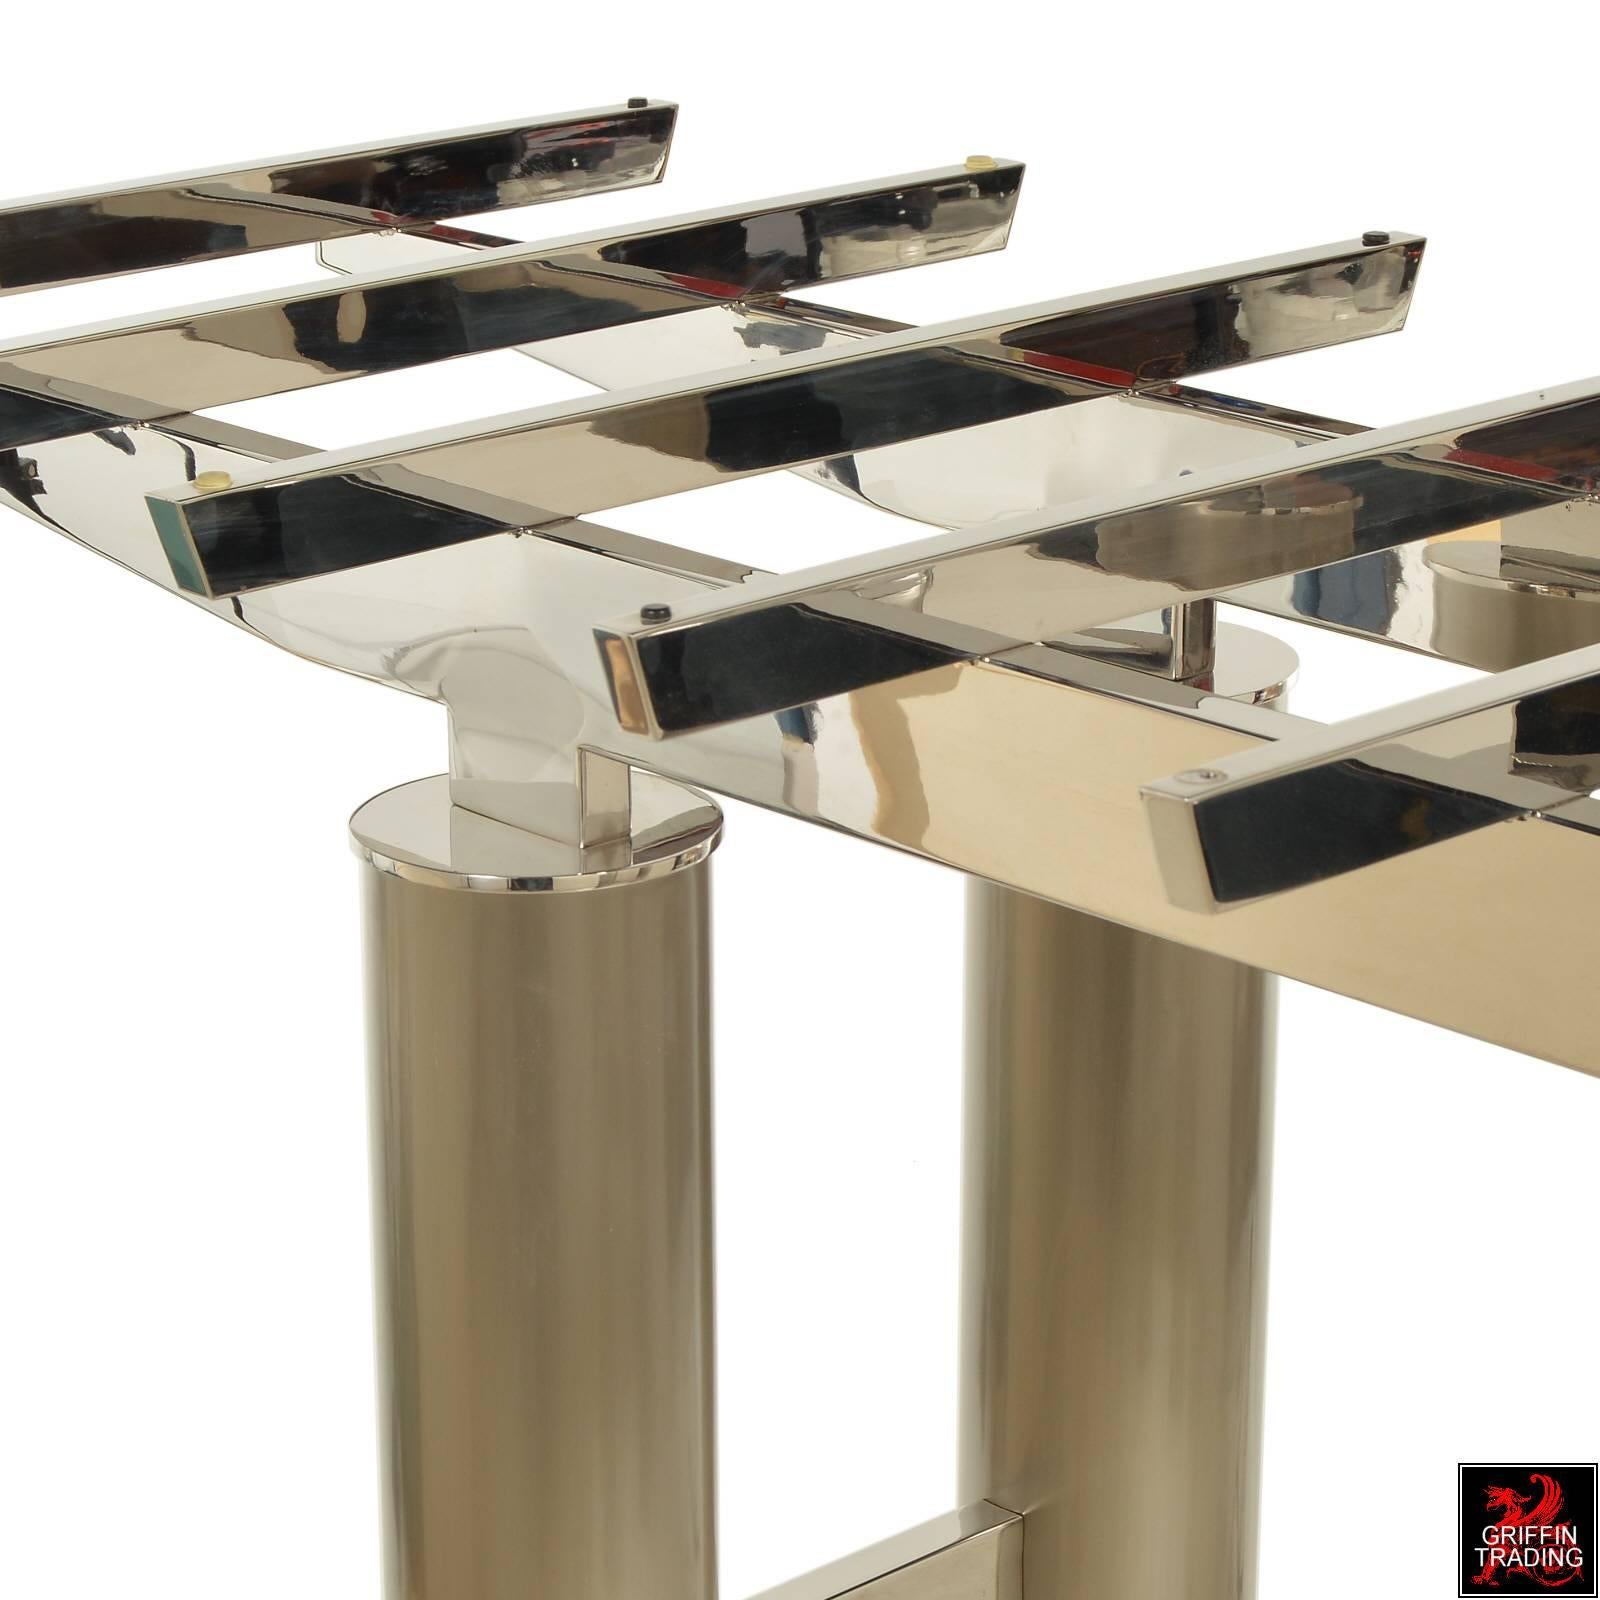 Brueton Glass, Chrome and Stainless Steel Dining Table by Tamarkin-Techler Group In Excellent Condition For Sale In Dallas, TX